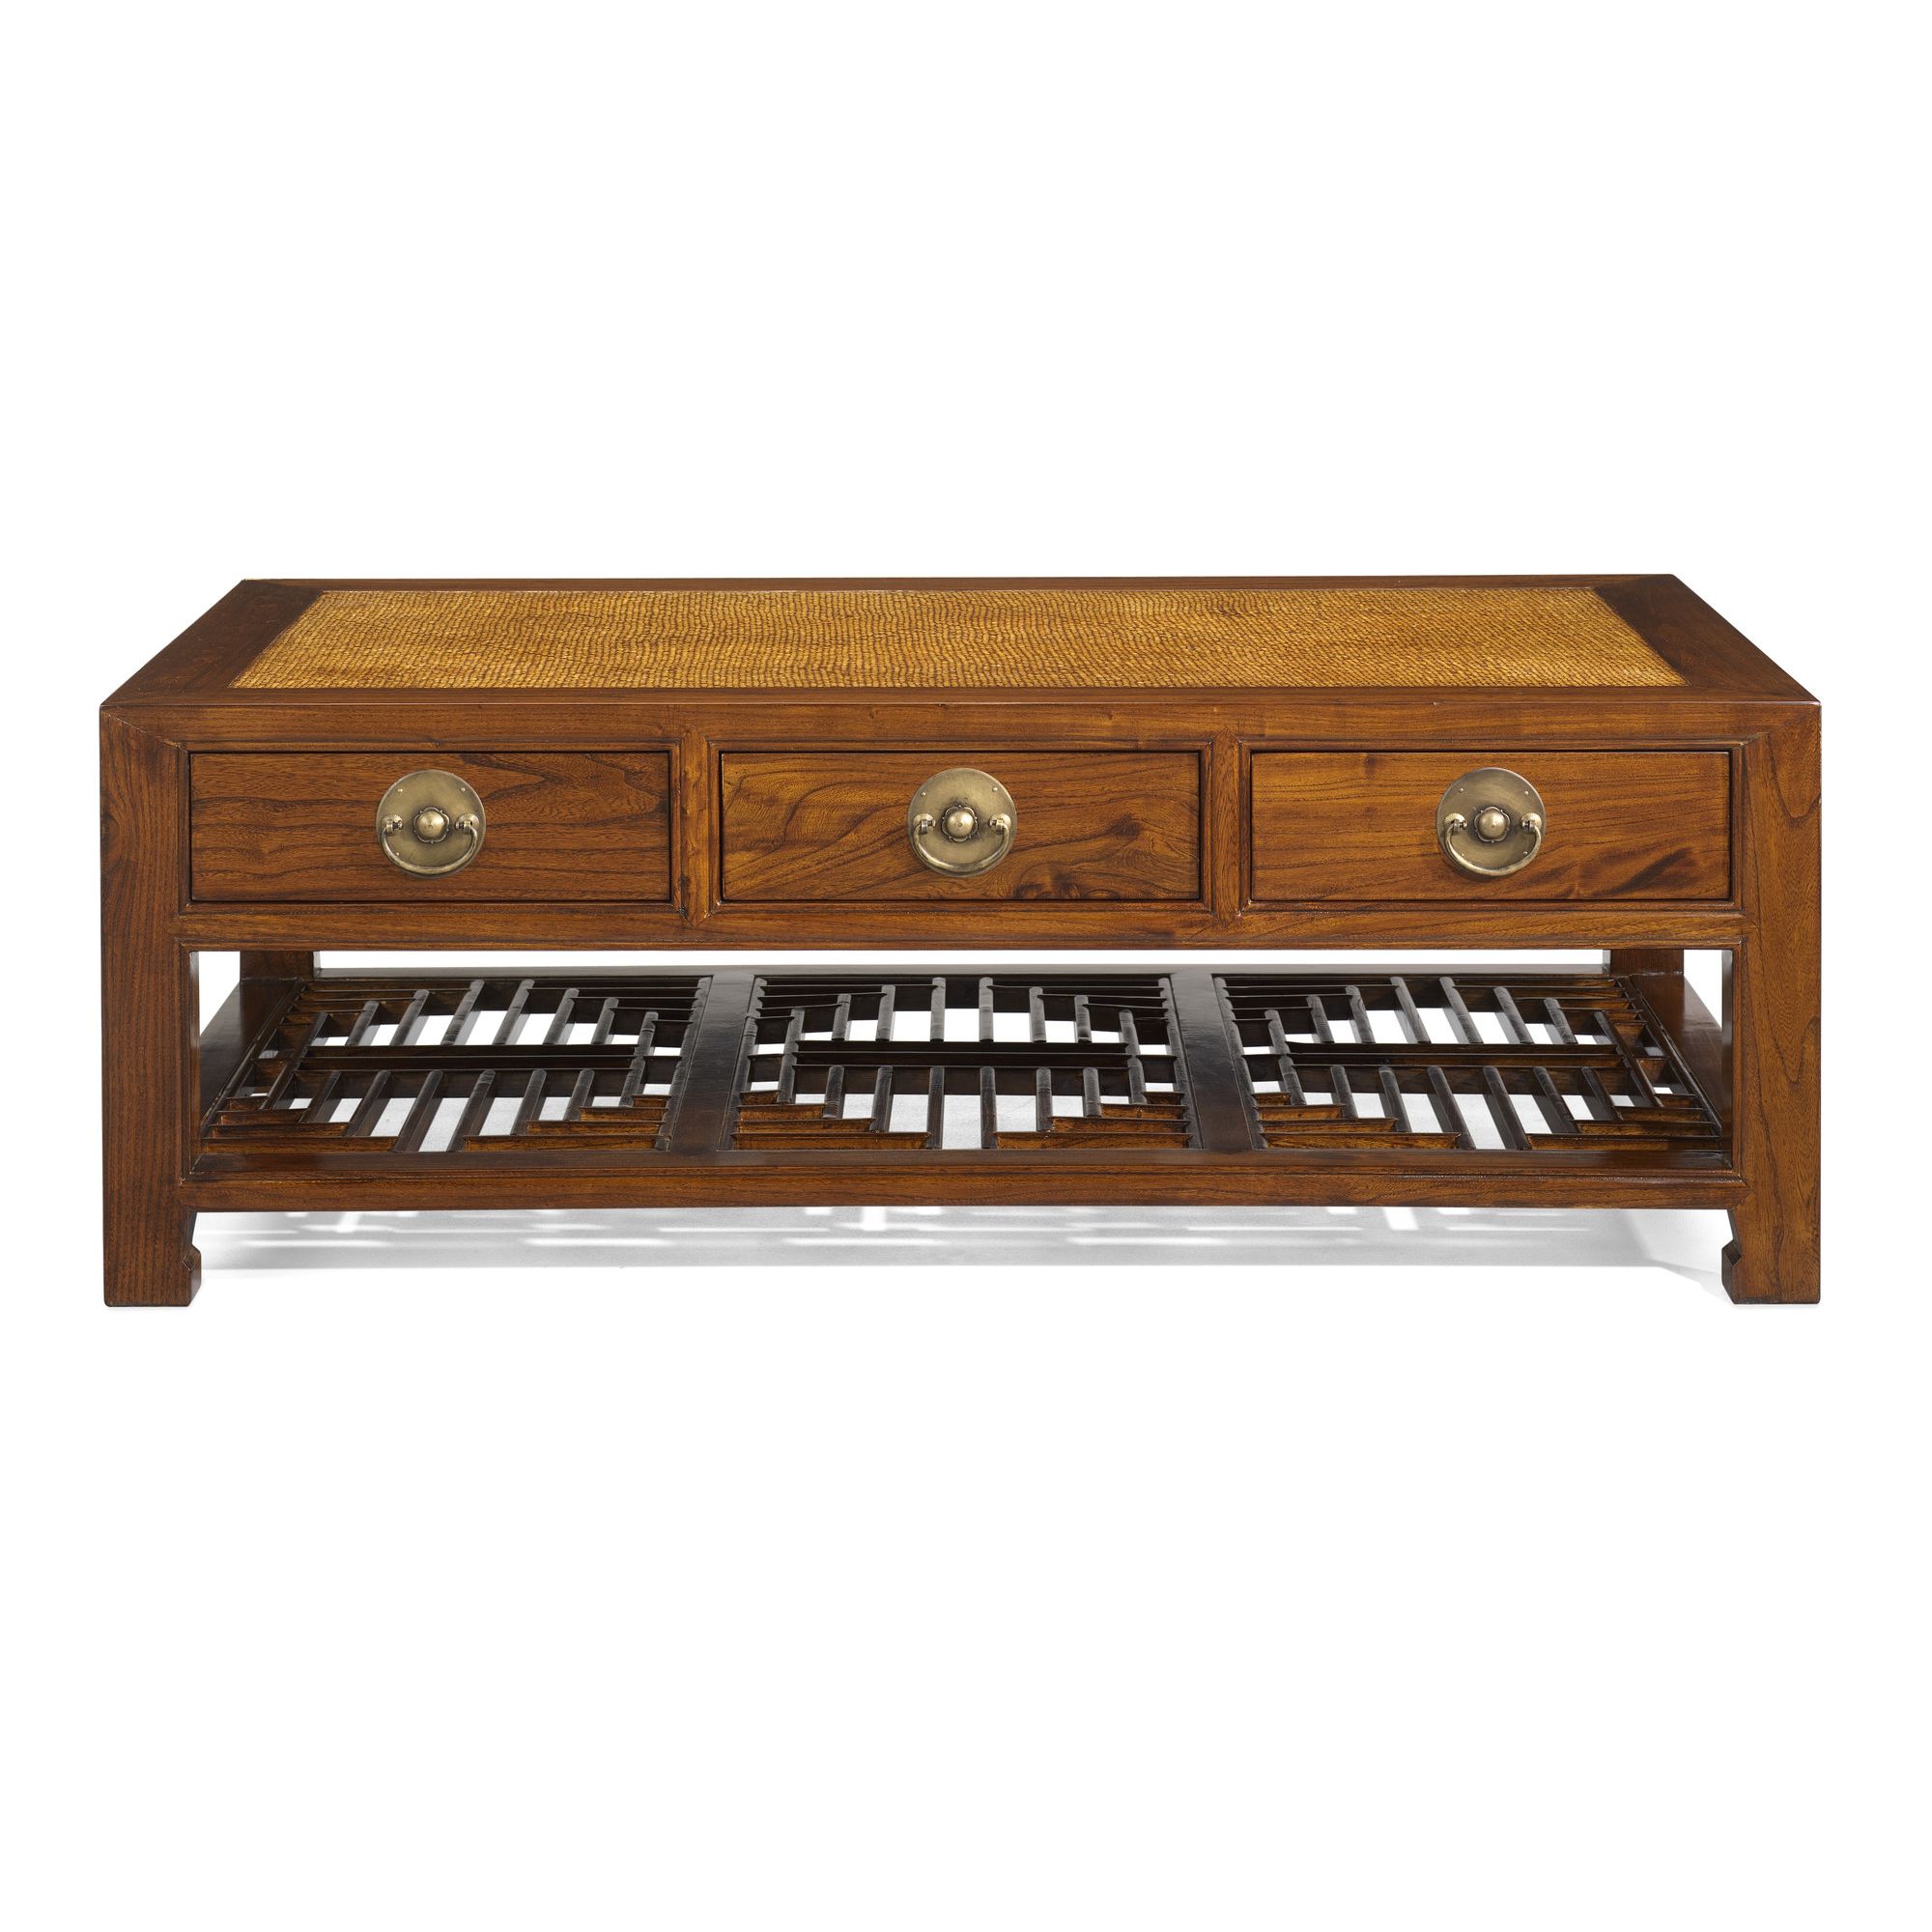 Shimu Chinese Classical Carved Coffee Table - Warm Elm at Tesco Direct